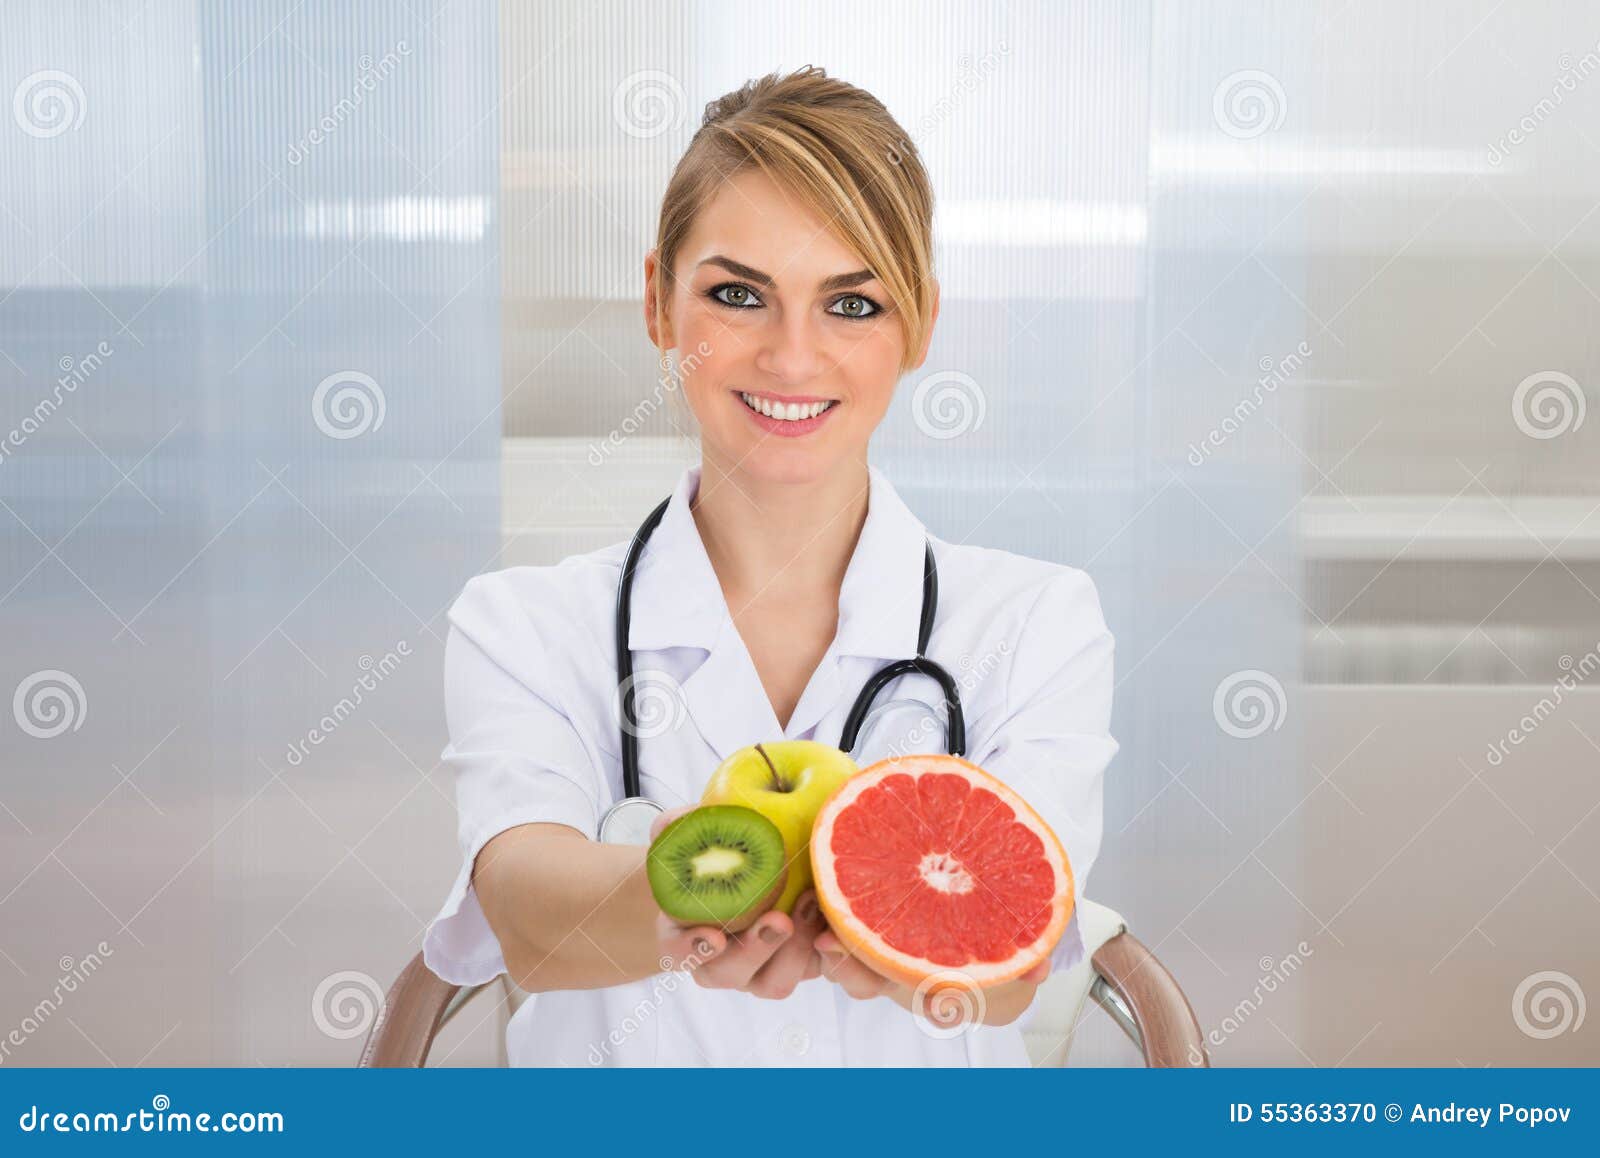 female dietician holding fruits